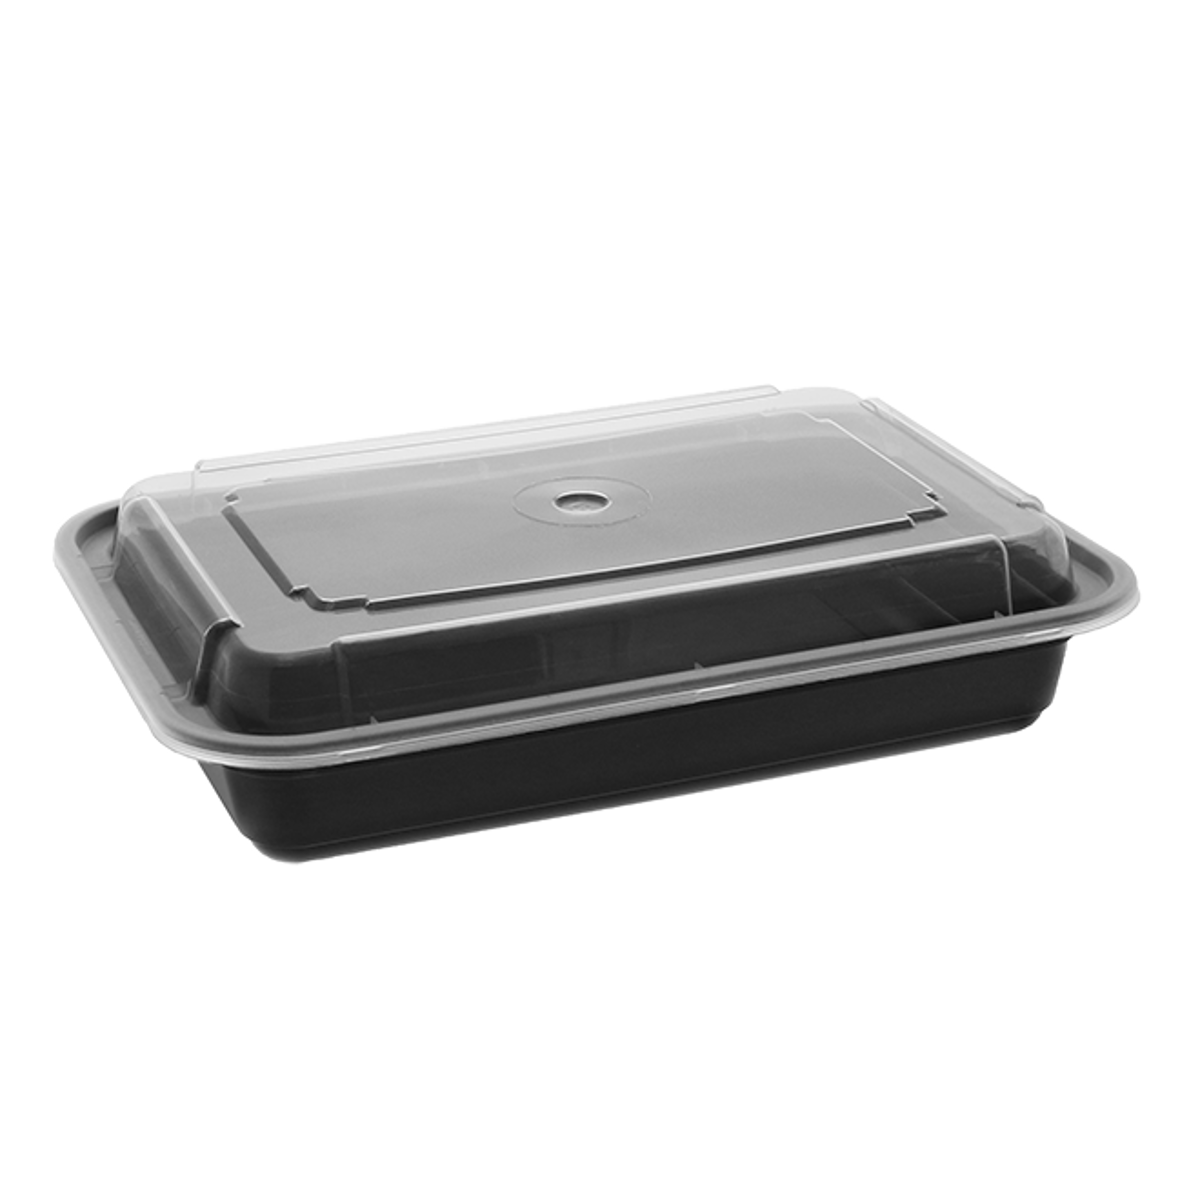 28 oz. Rectangular To-Go Combo Container, Black with Clear Lid